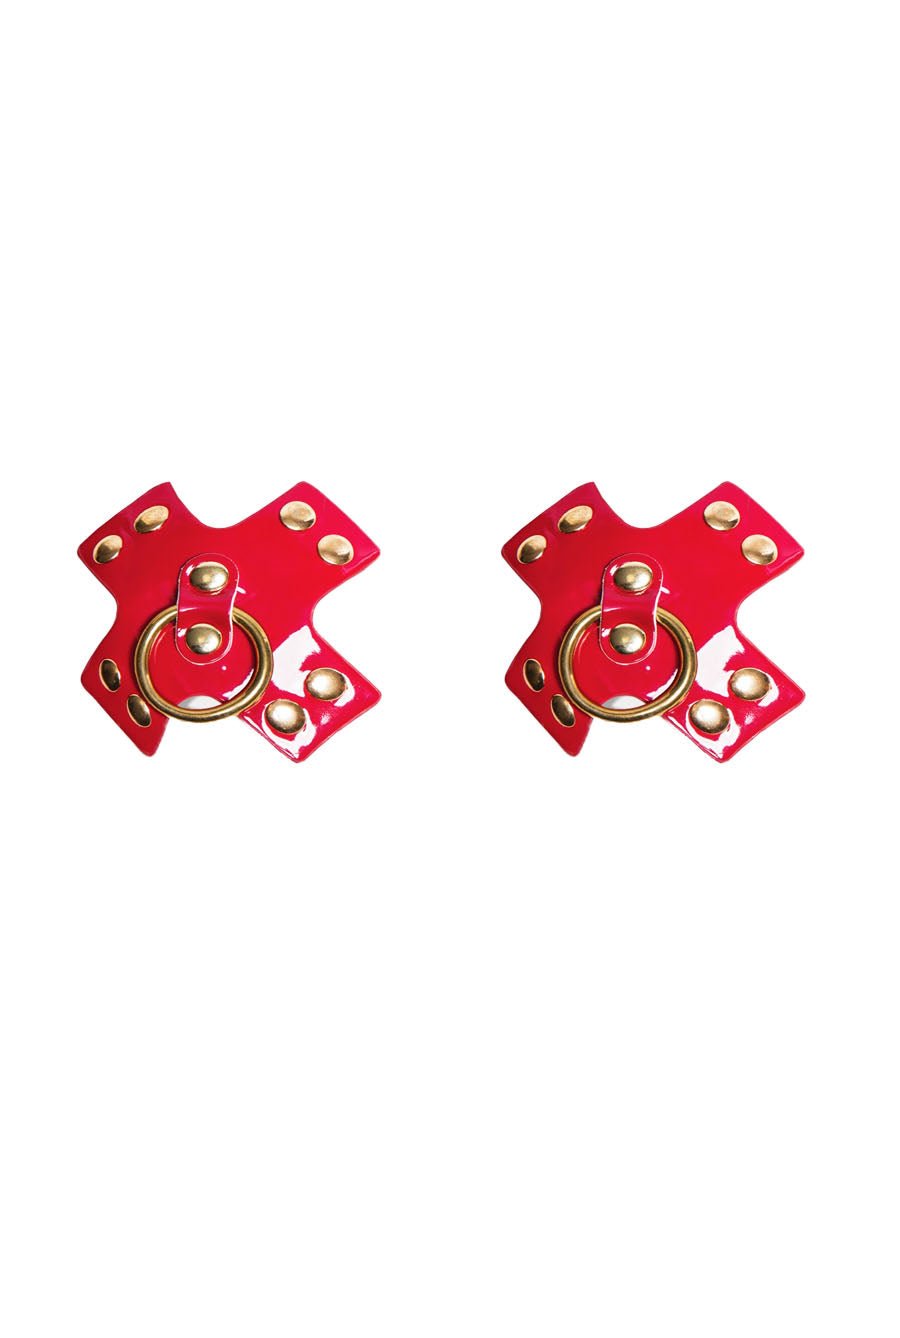 red leather nipple covers